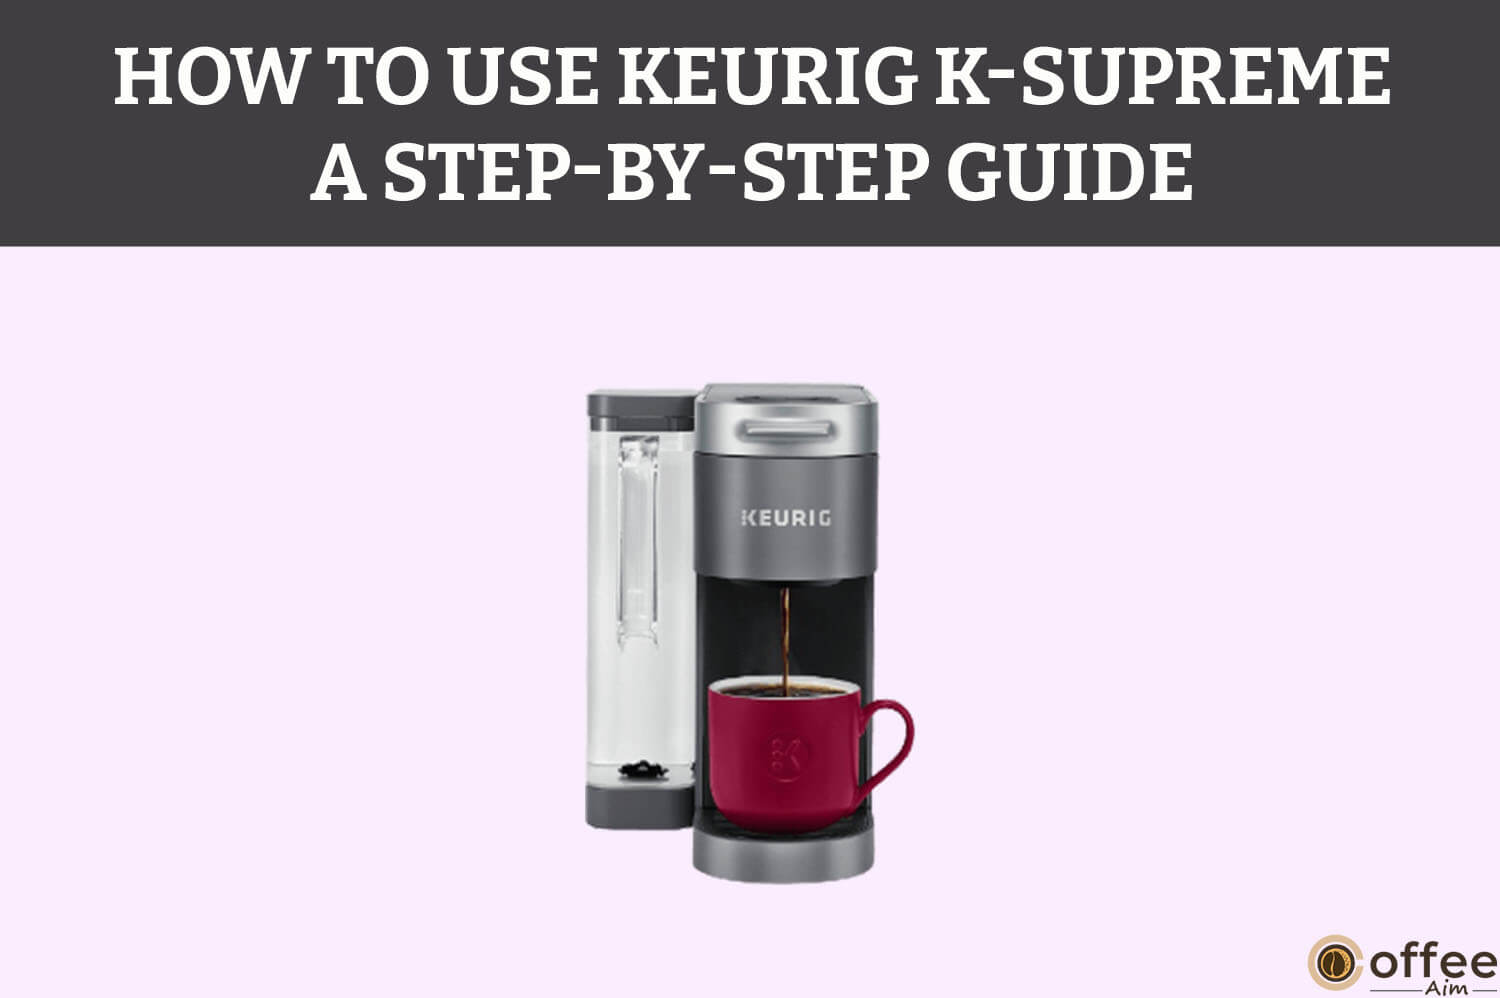 Featured image for the article "How To Use Keurig K-Supreme - A Step-By-Step Guide"